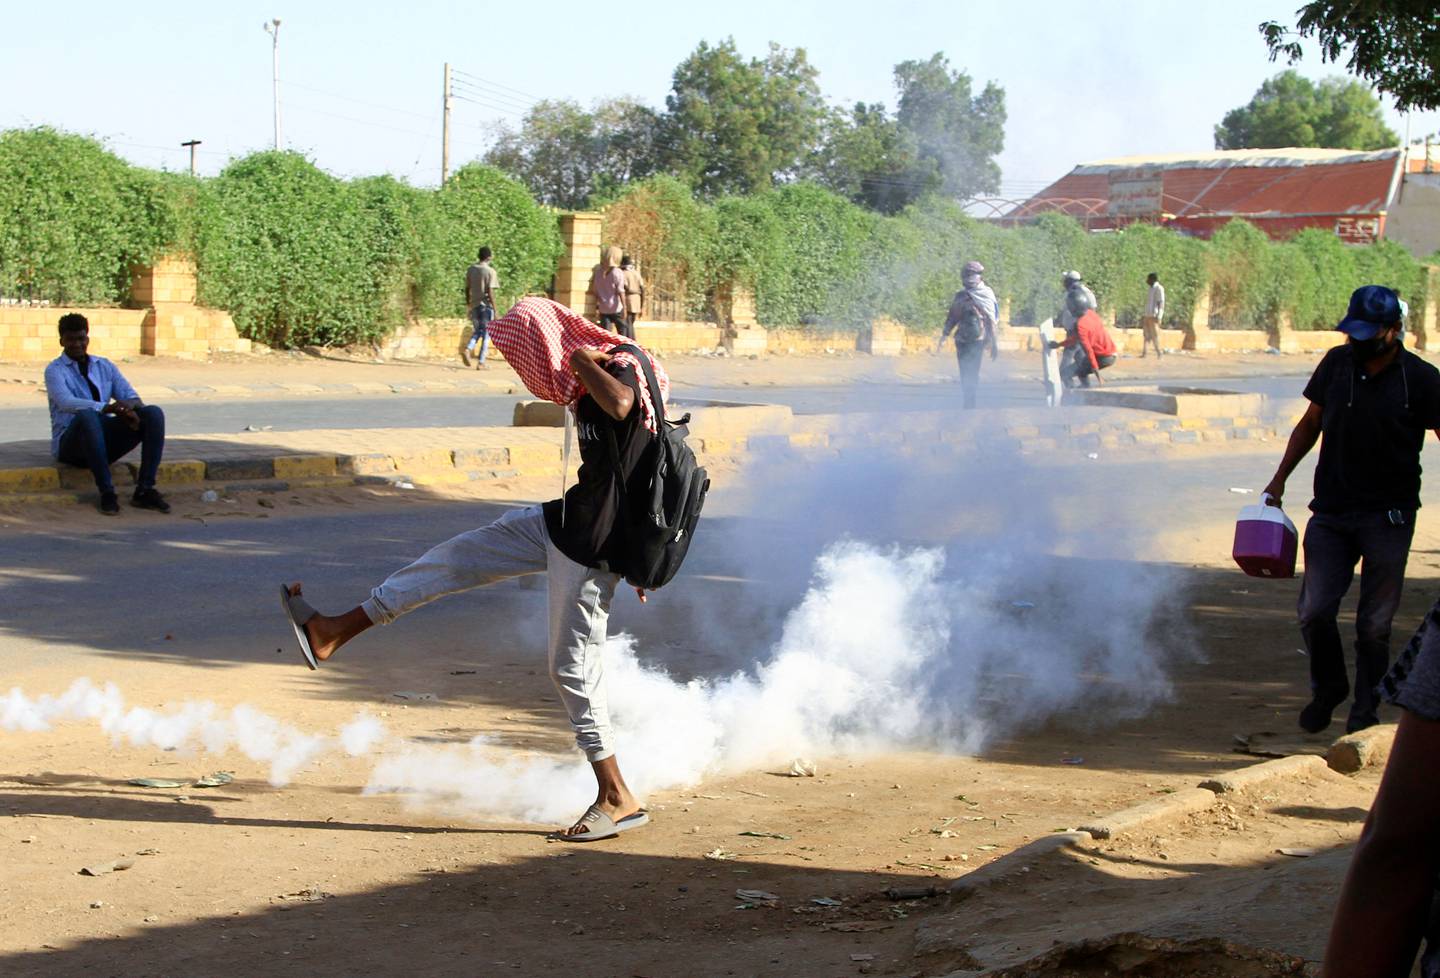 Sudanese security forces fire tear gas at protesters during a demonstration calling for civilian rule in the capital Khartoum's twin city of Omdurman. AFP